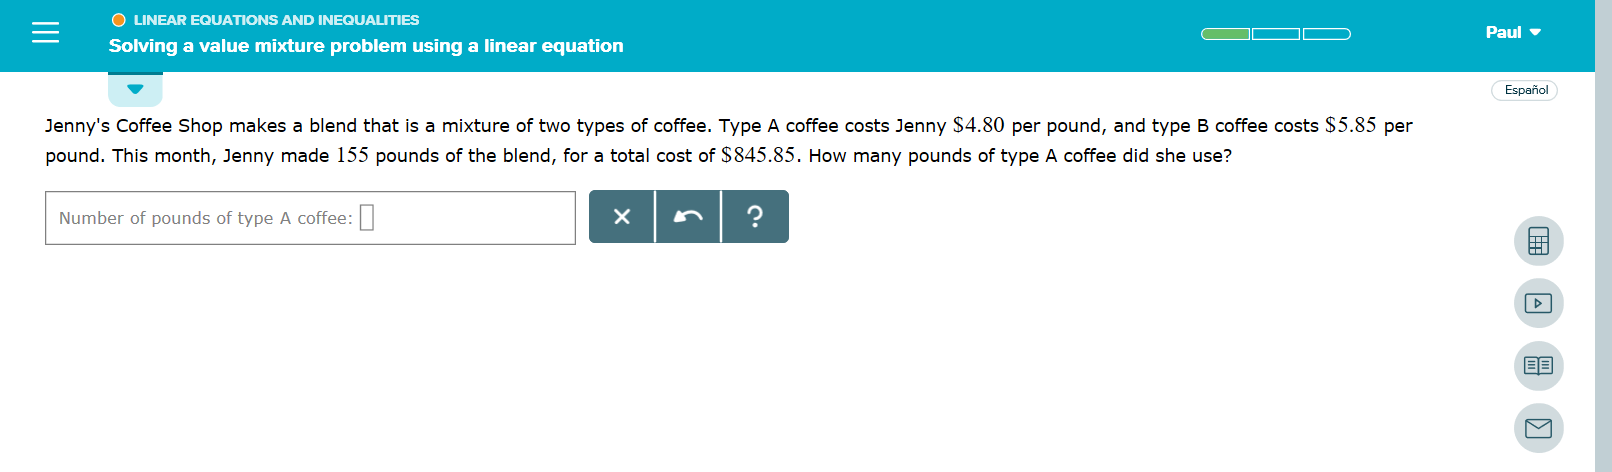 O LINEAR EQUATIONS AND INEQUALITIES
Paul
Solving a value mixture problem using a linear equation
Español
Jenny's Coffee Shop makes a blend that is a mixture of two types of coffee. Type A coffee costs Jenny $4.80 per pound, and type B coffee costs $5.85 per
pound. This month, Jenny made 155 pounds of the blend, for a total cost of $845.85. How many pounds of type A coffee did she use?
?
X
Number of pounds of type A coffee:
